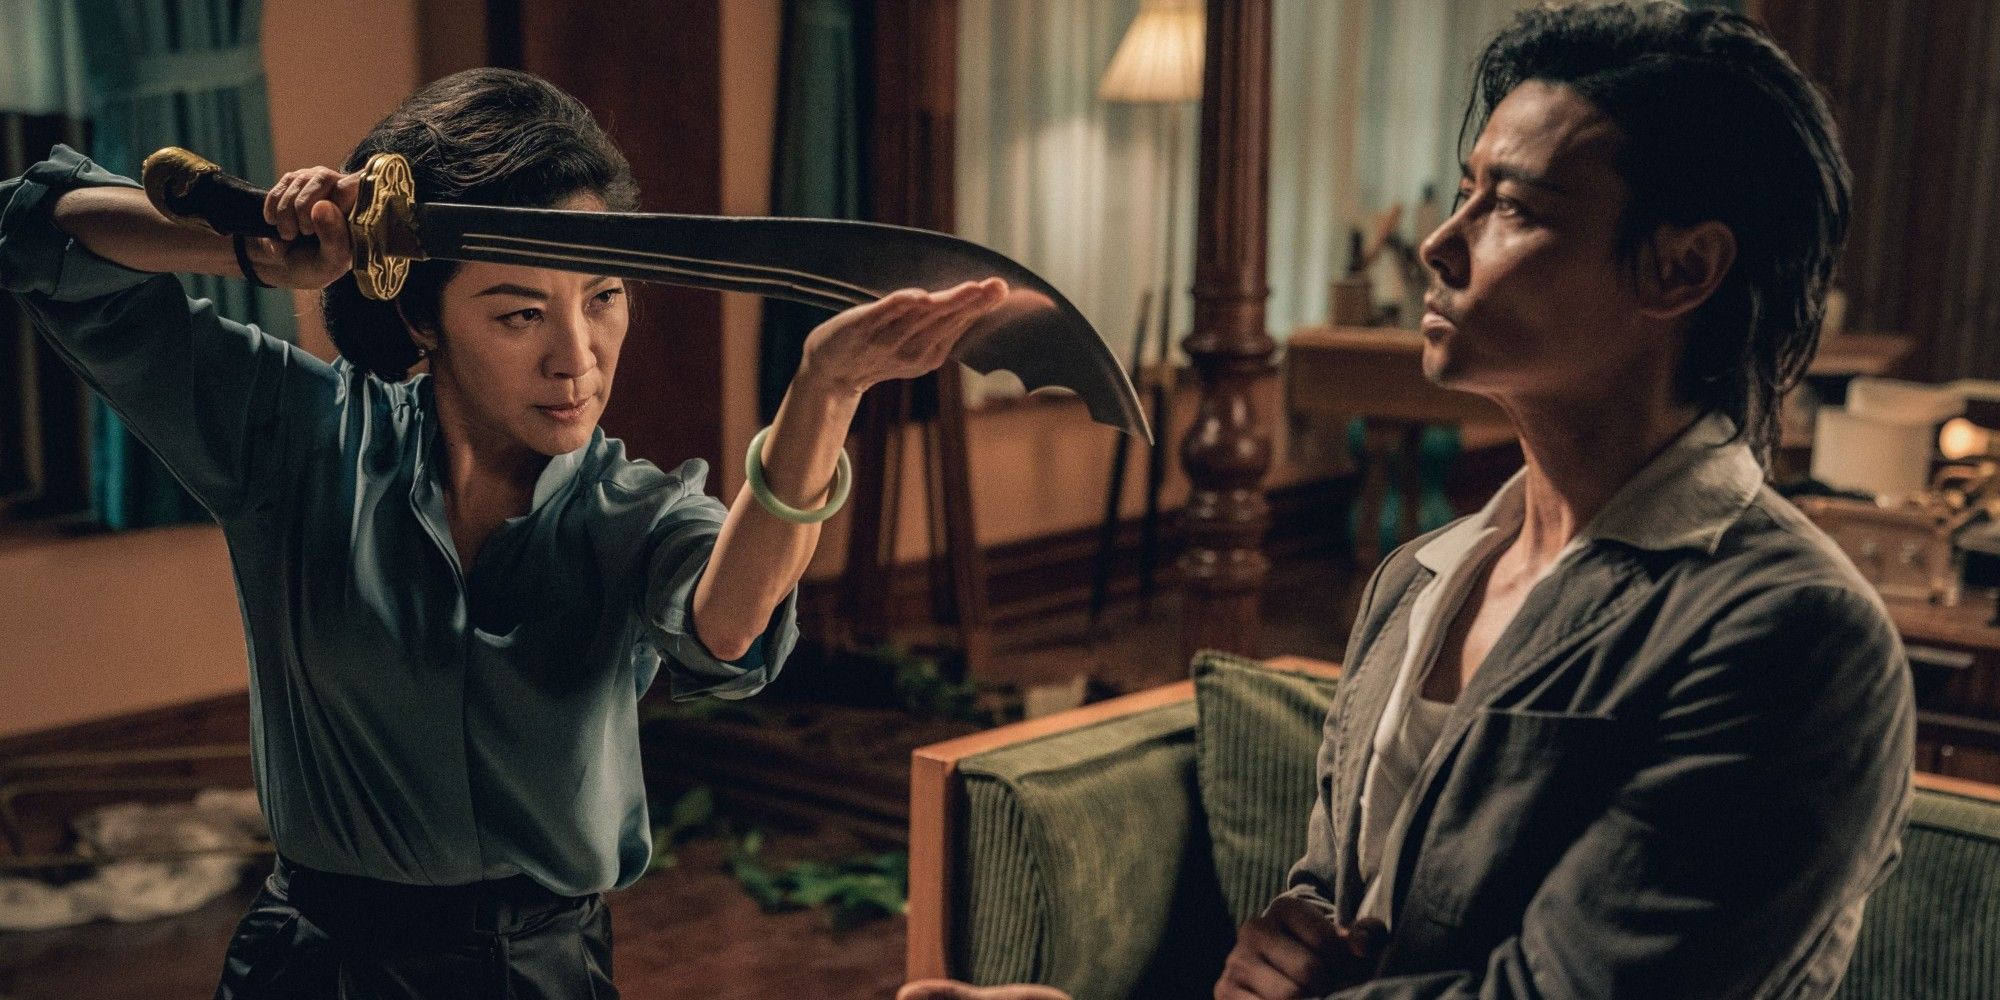 Tso Gnan Kwan points her sword at Cheung Tin-chi in Master Z The Ip Man Legacy